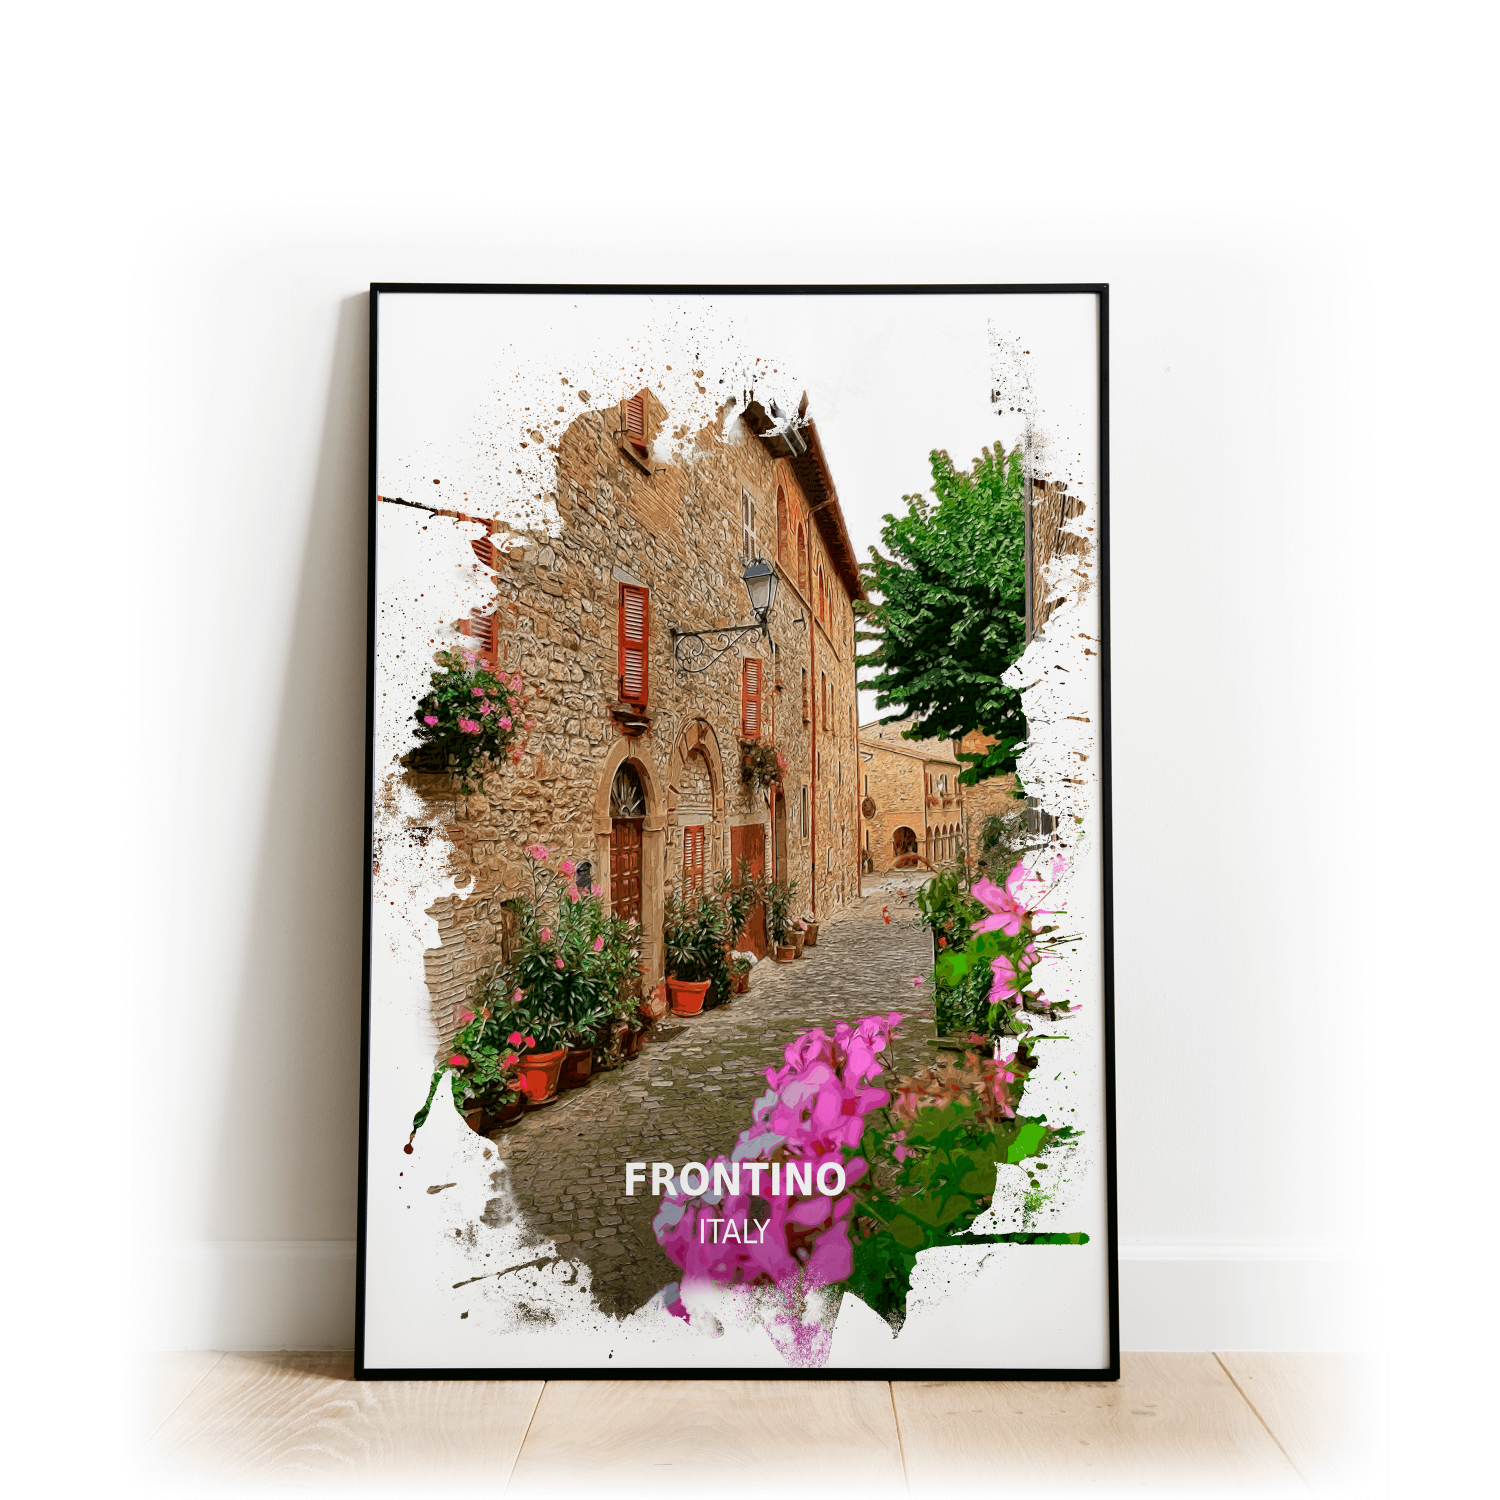 Frontino - Italy - Print - A4 - Standard - Print Only